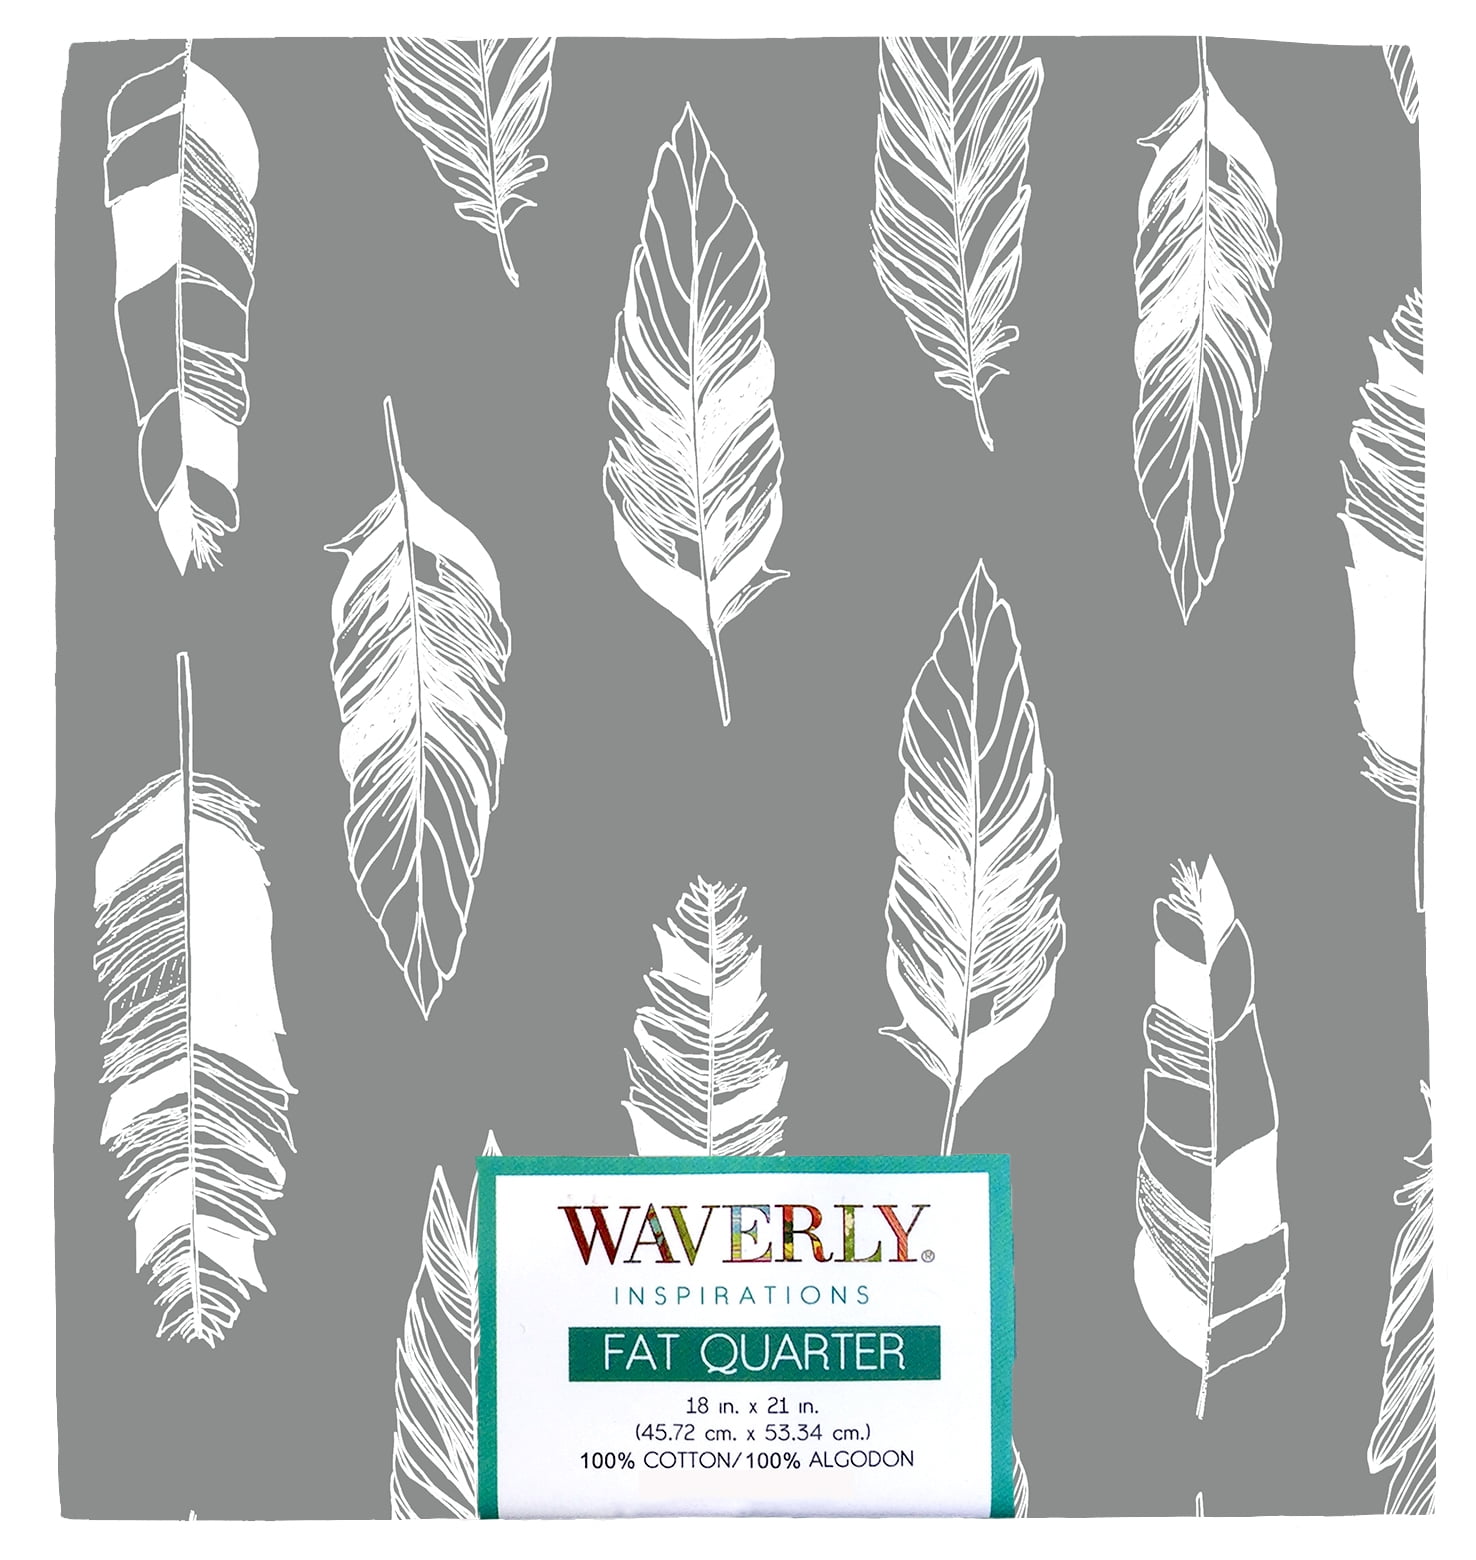 Waverly Inspirations 18" x 21" 100% Cotton Fat Quarter Feathers Steel Fat Quarter Print Quilting & Craft Fabric, 1 Each